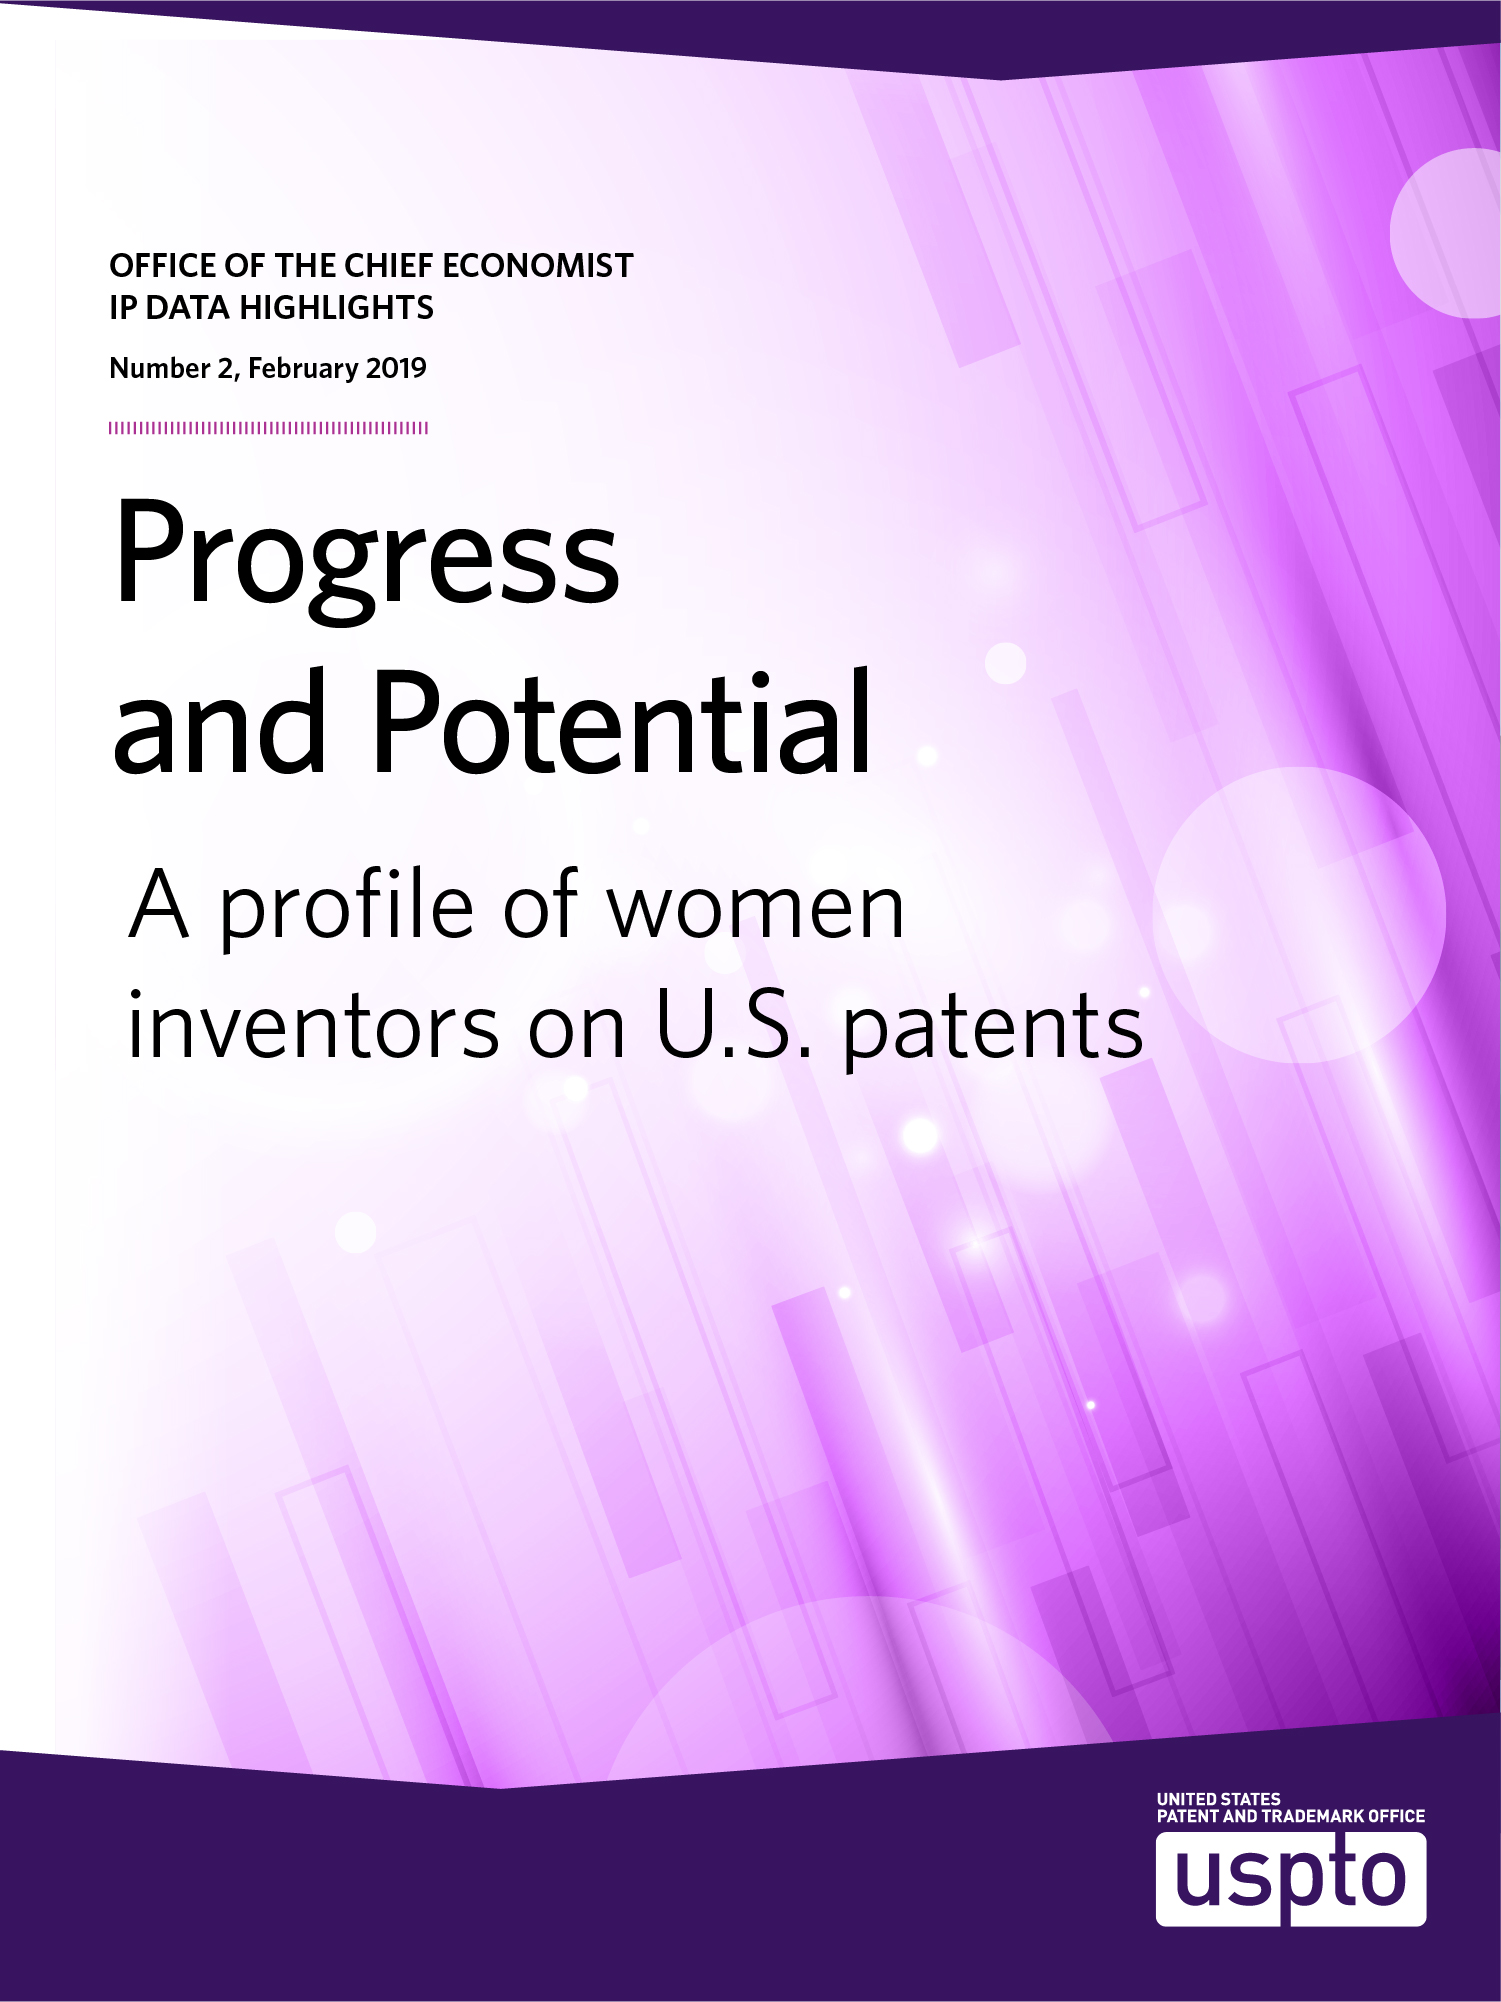 IP Data Highlight no. 2: Progress and Potential report, text on a purple background